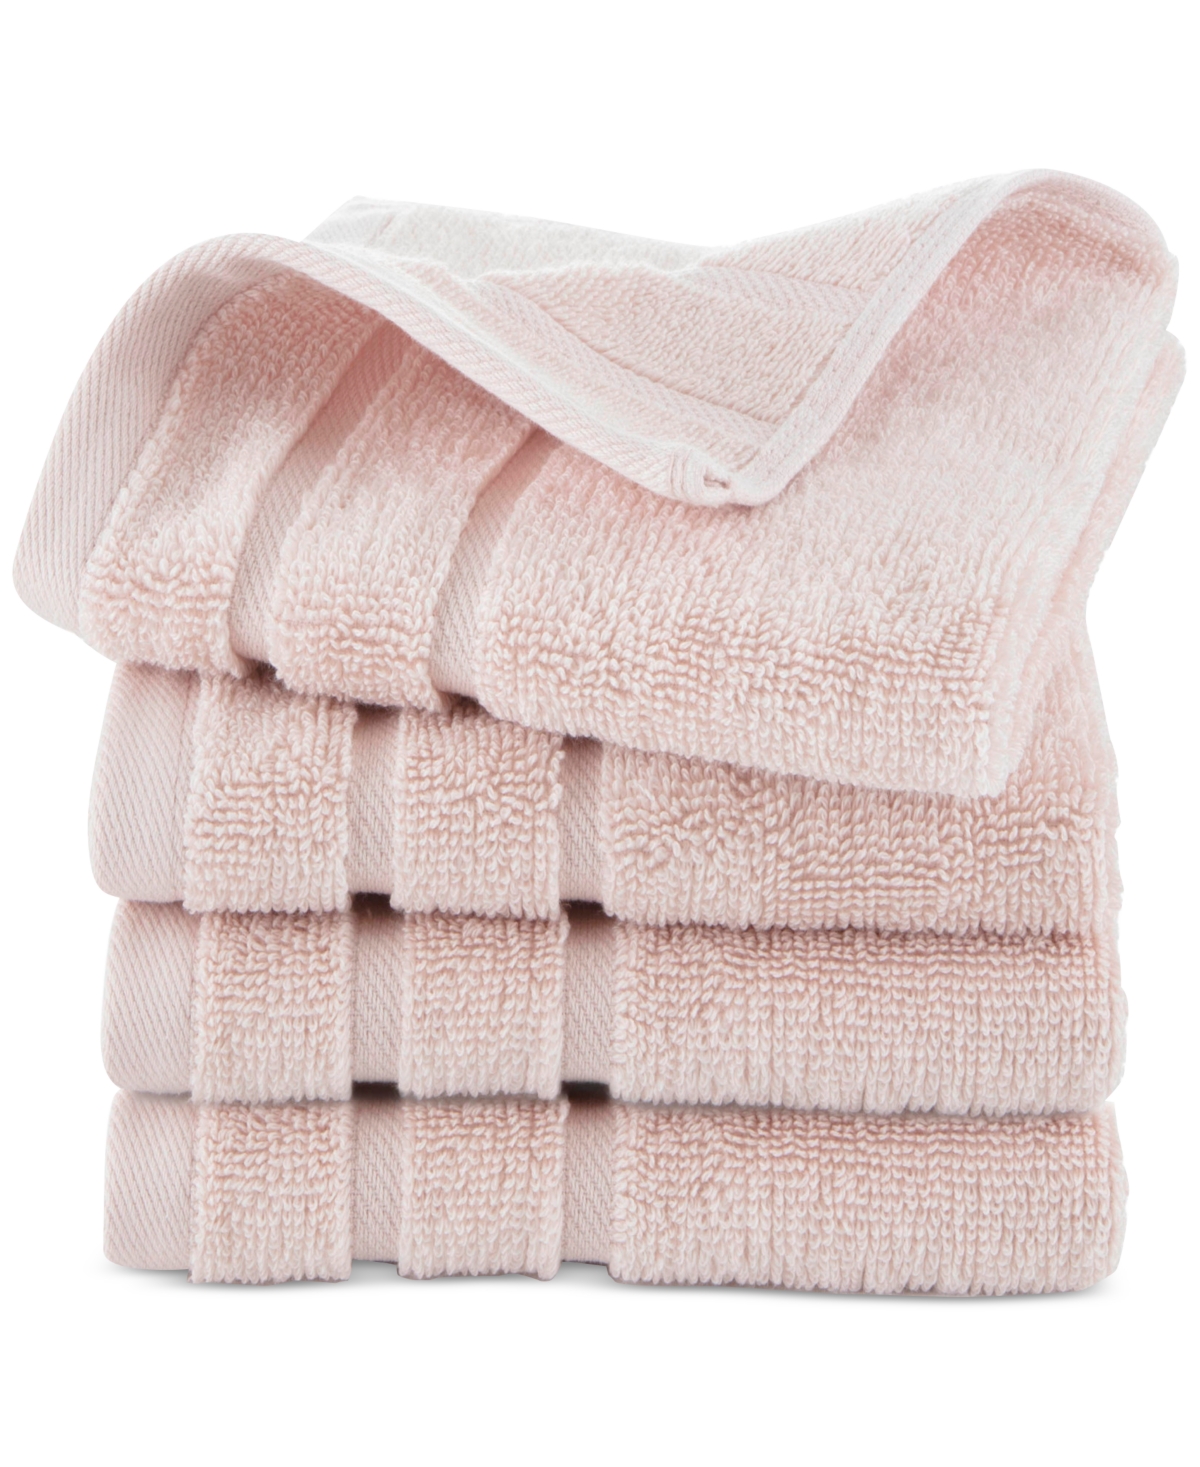 Clean Design Home X Martex Low Lint 4 Pack Supima Cotton Washcloths In Blush